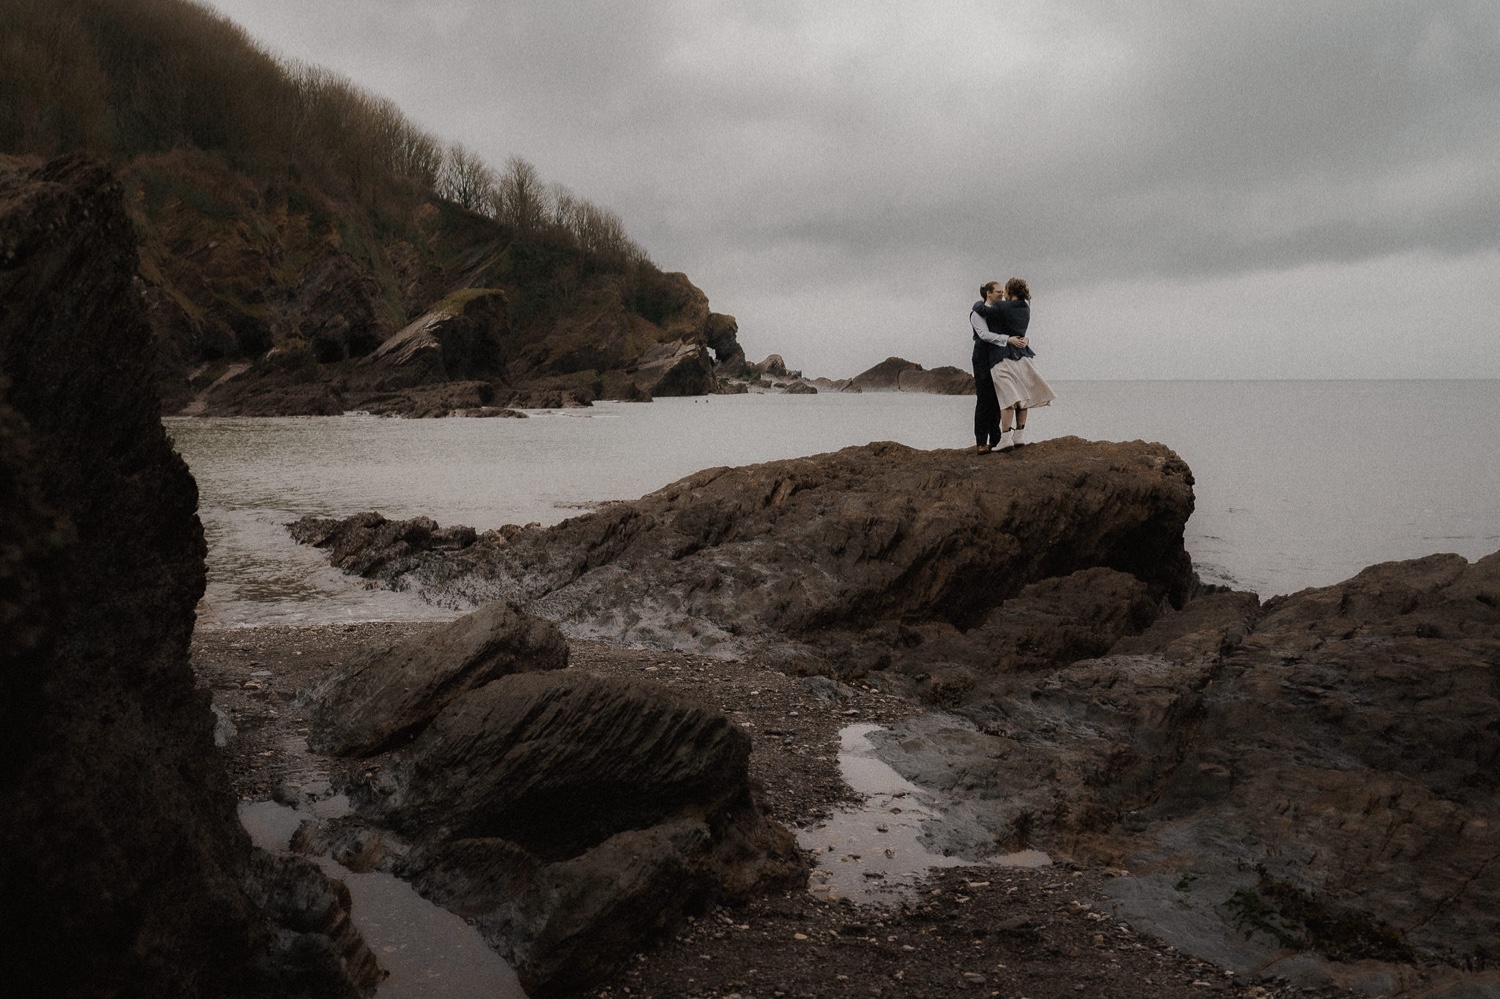 A couple standing on rocks near the ocean.